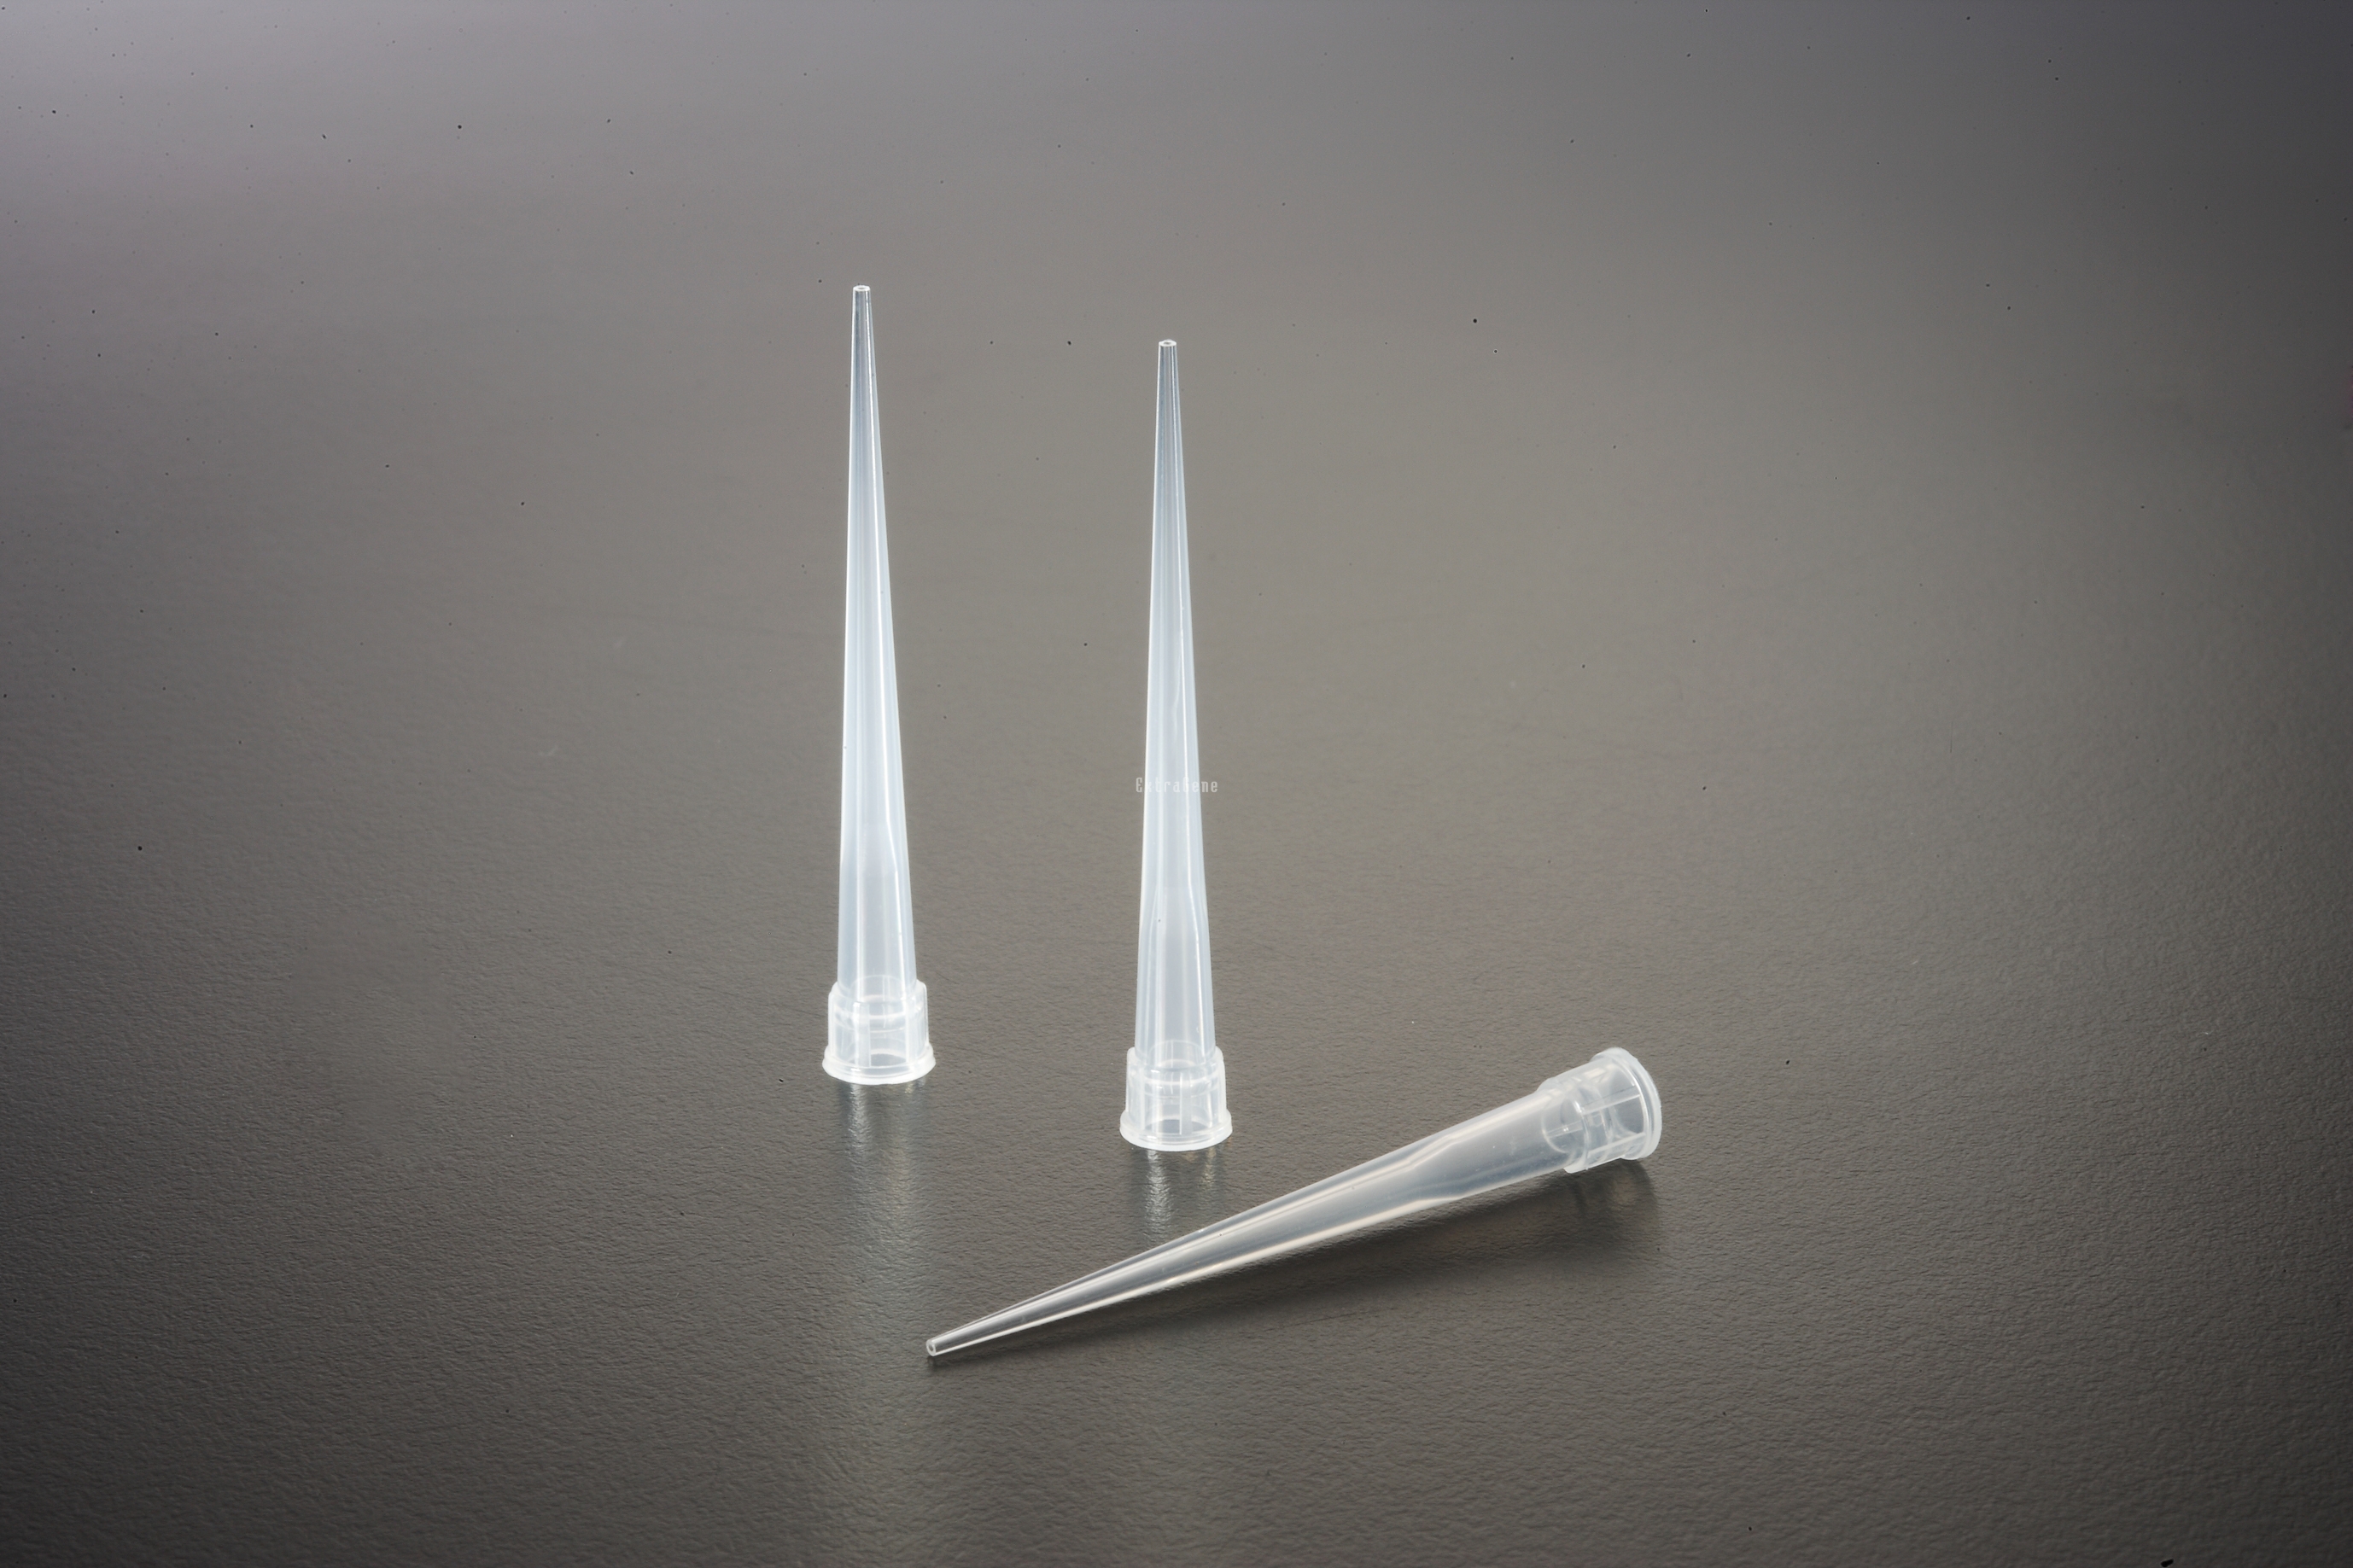 10ul Filter Micropipette Tips (White Tips)